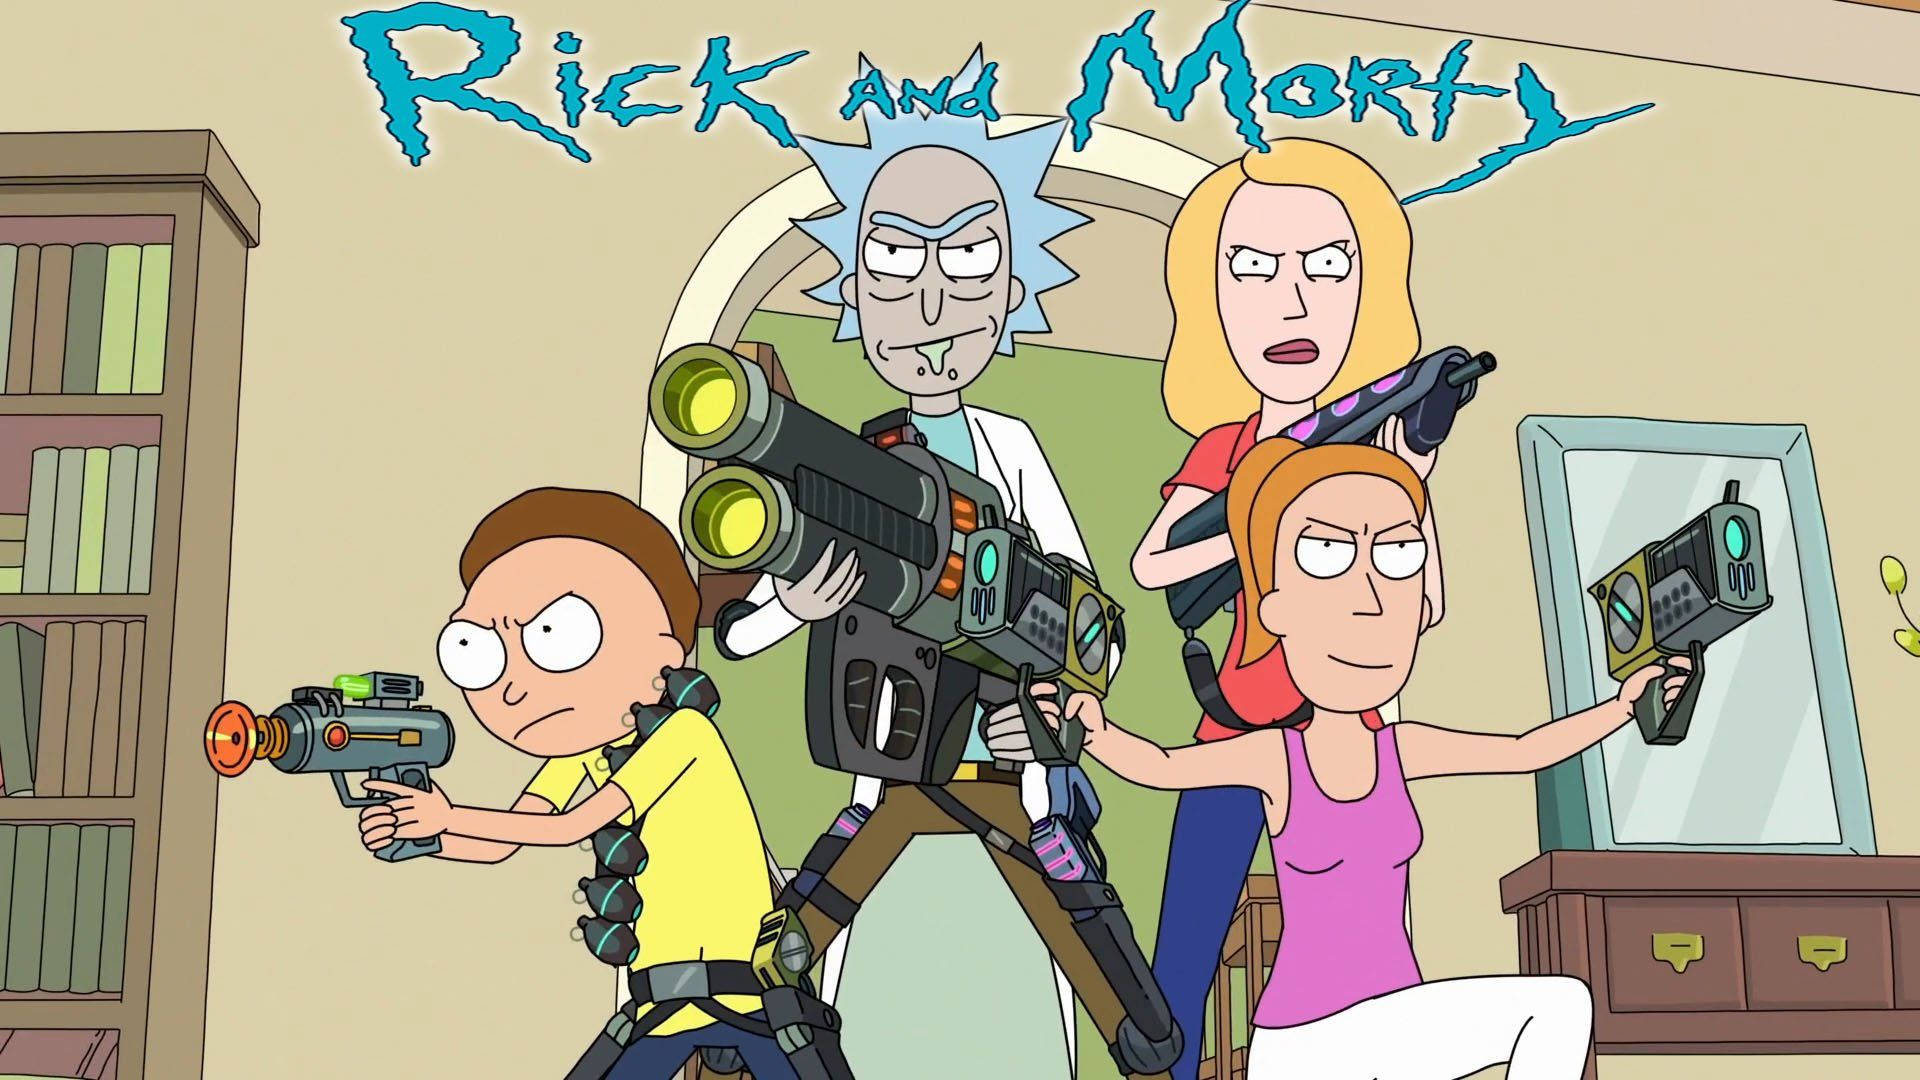 Rick And Morty Gear Up For An Adventure Wallpaper